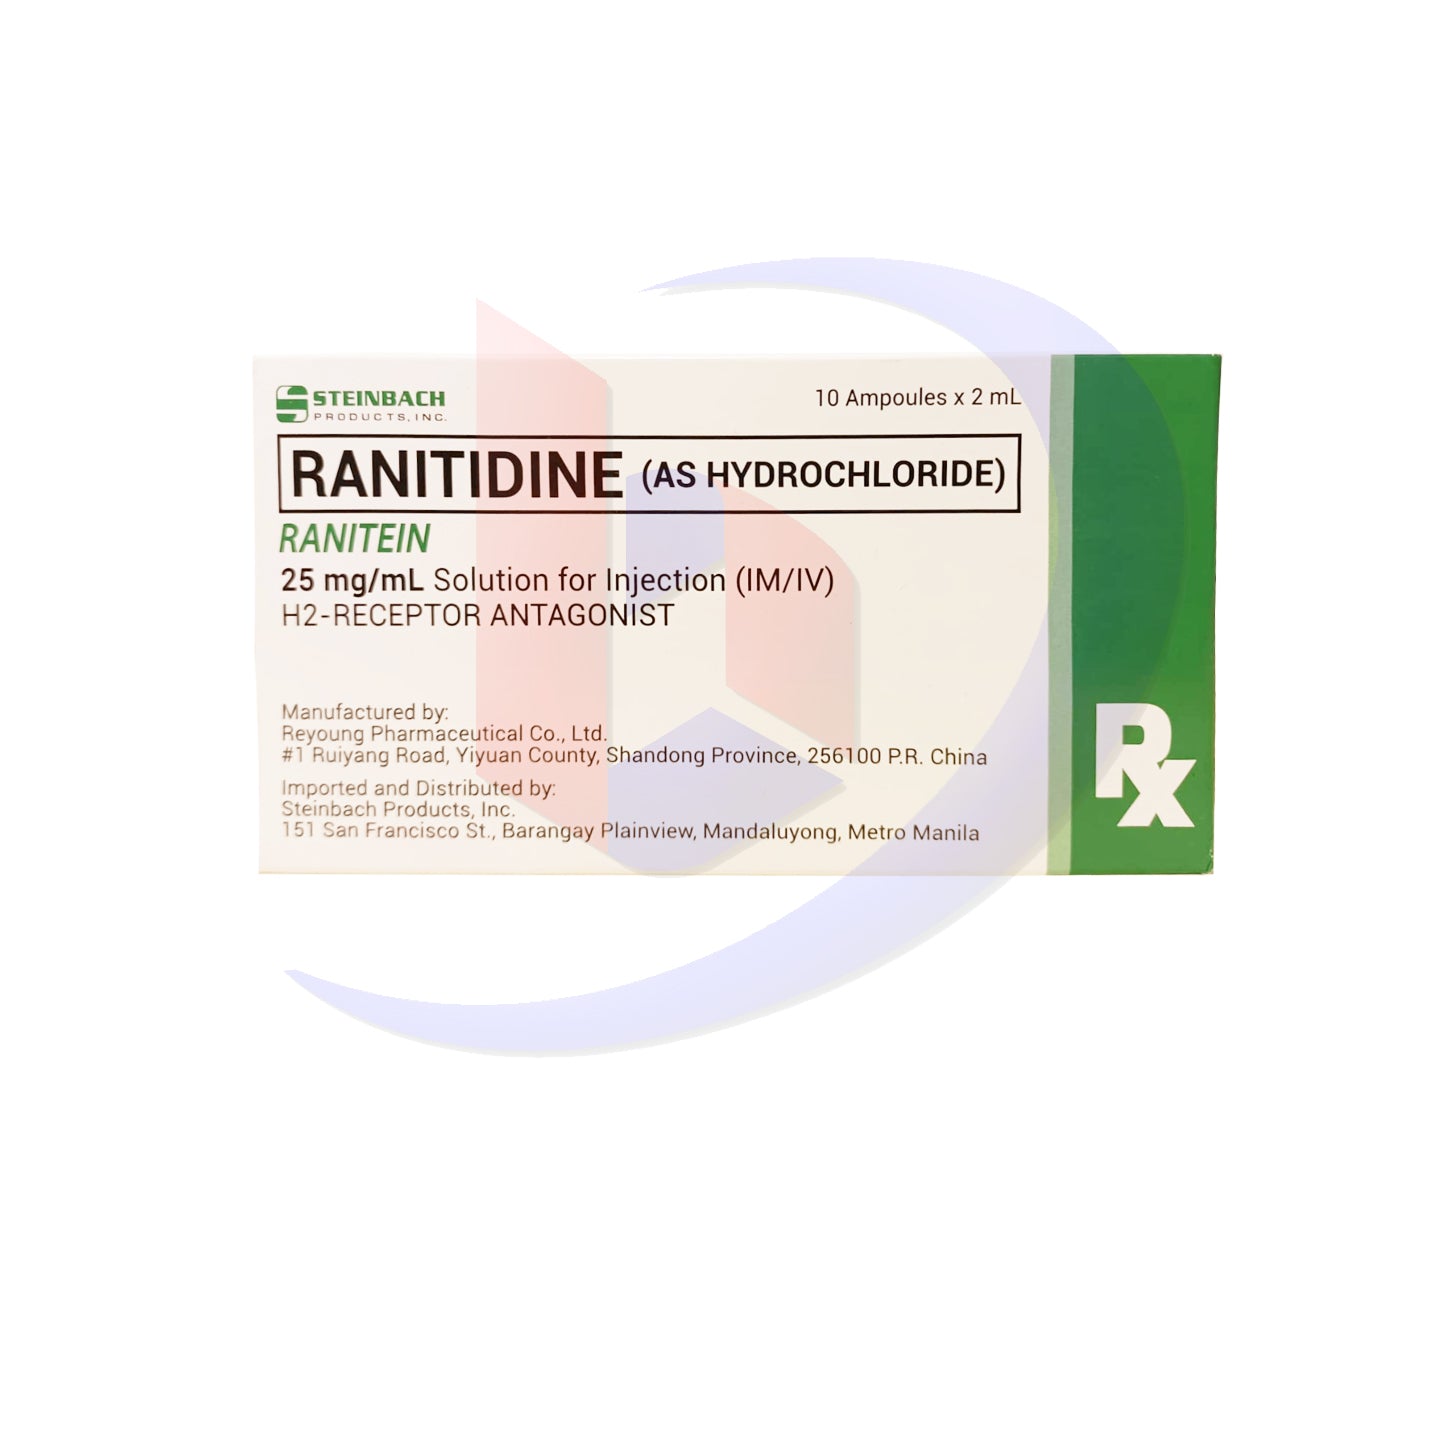 Ranitidine as Hydrochloride (Ranitein) 25mg/ml Solution for Injection I.M/I.V 2ml x Ampoules 10's